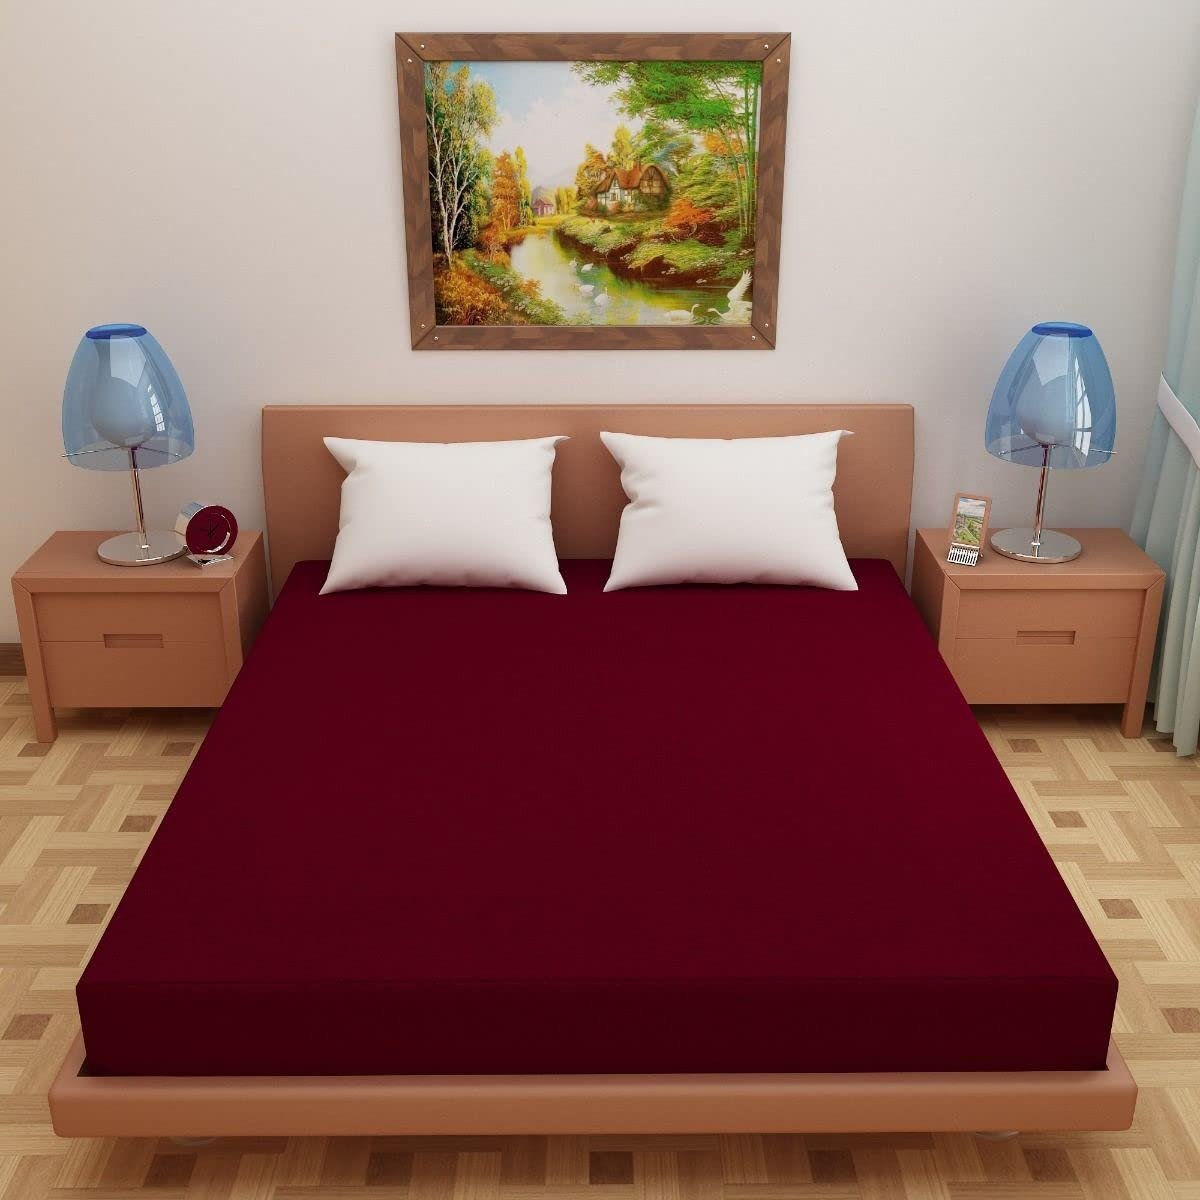 Kuber Industries Waterproof Double Bed Mattress Cover|Breathable Terry Cotton Surface & Elastic Fitted Mattress Protector,6 x 6.5 Ft. (Maroon)